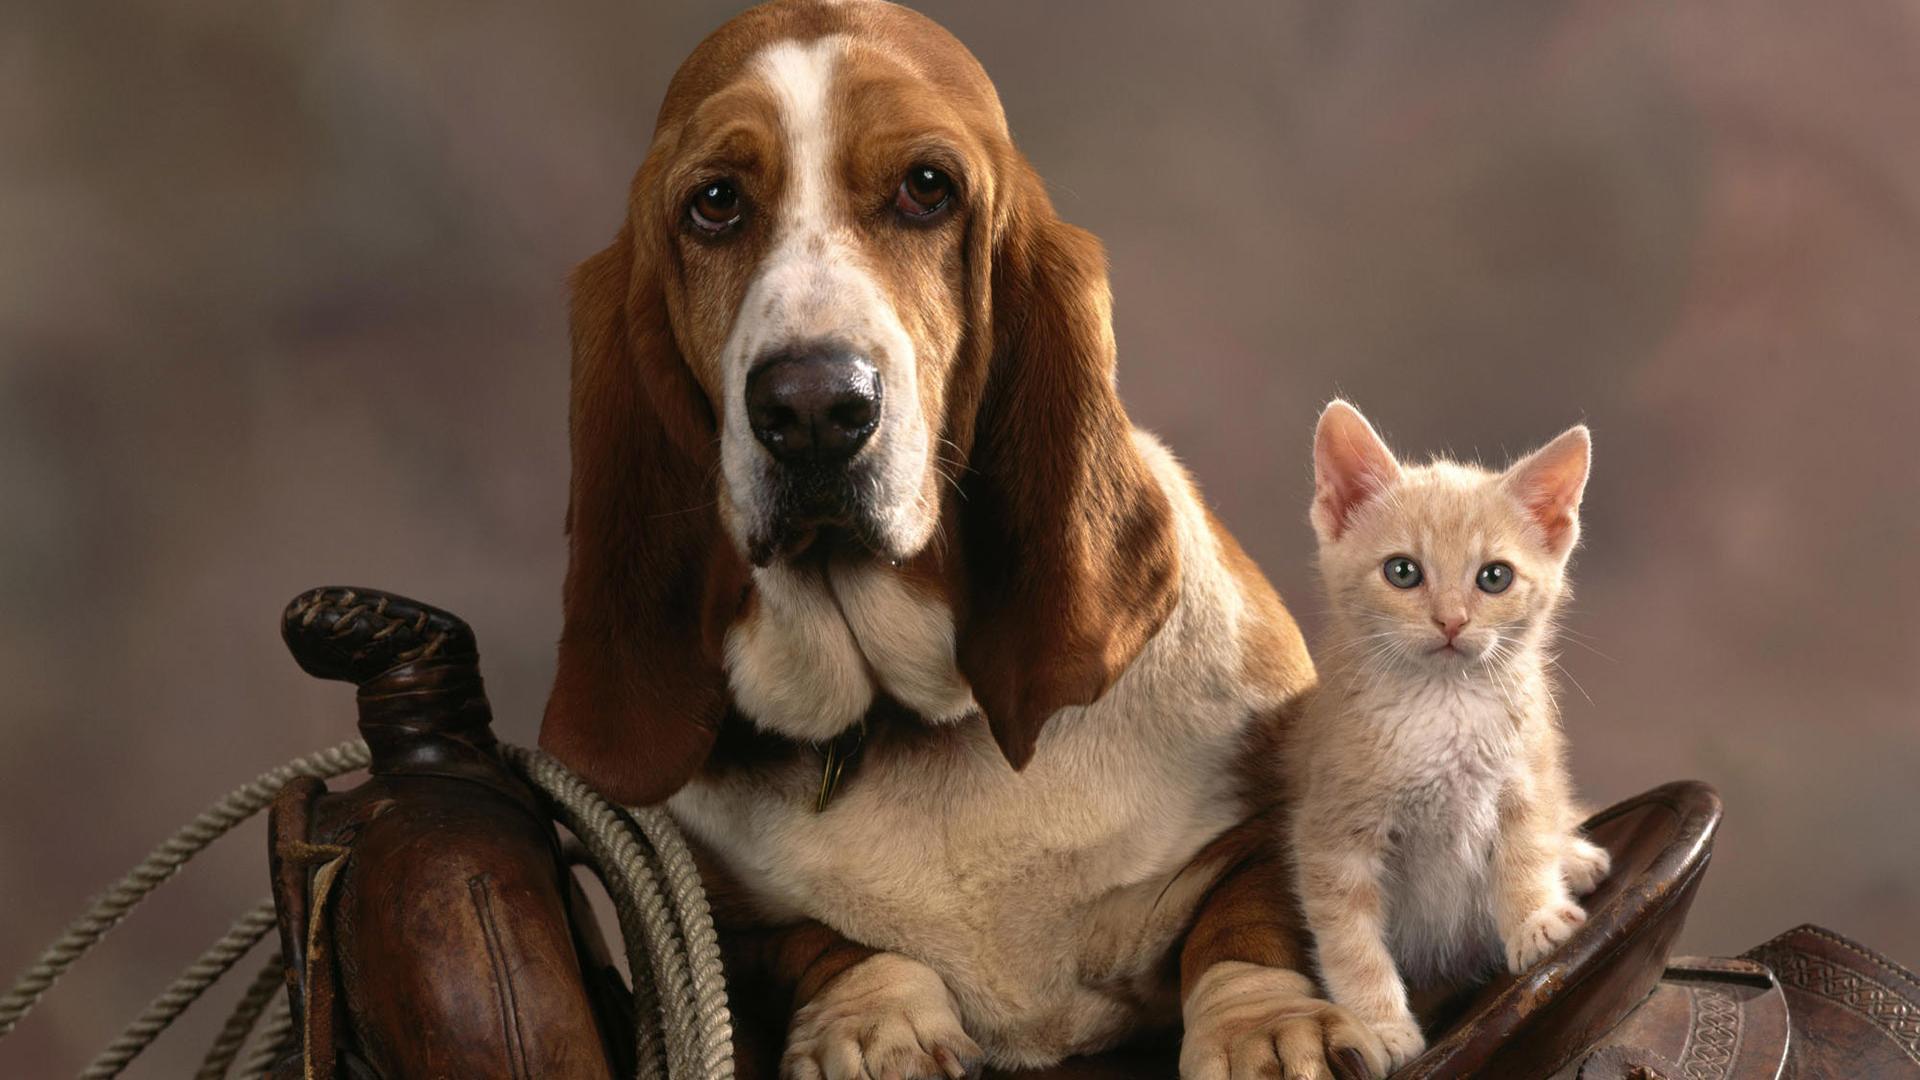 Wallpaper For > Funny Cat And Dog Wallpaper